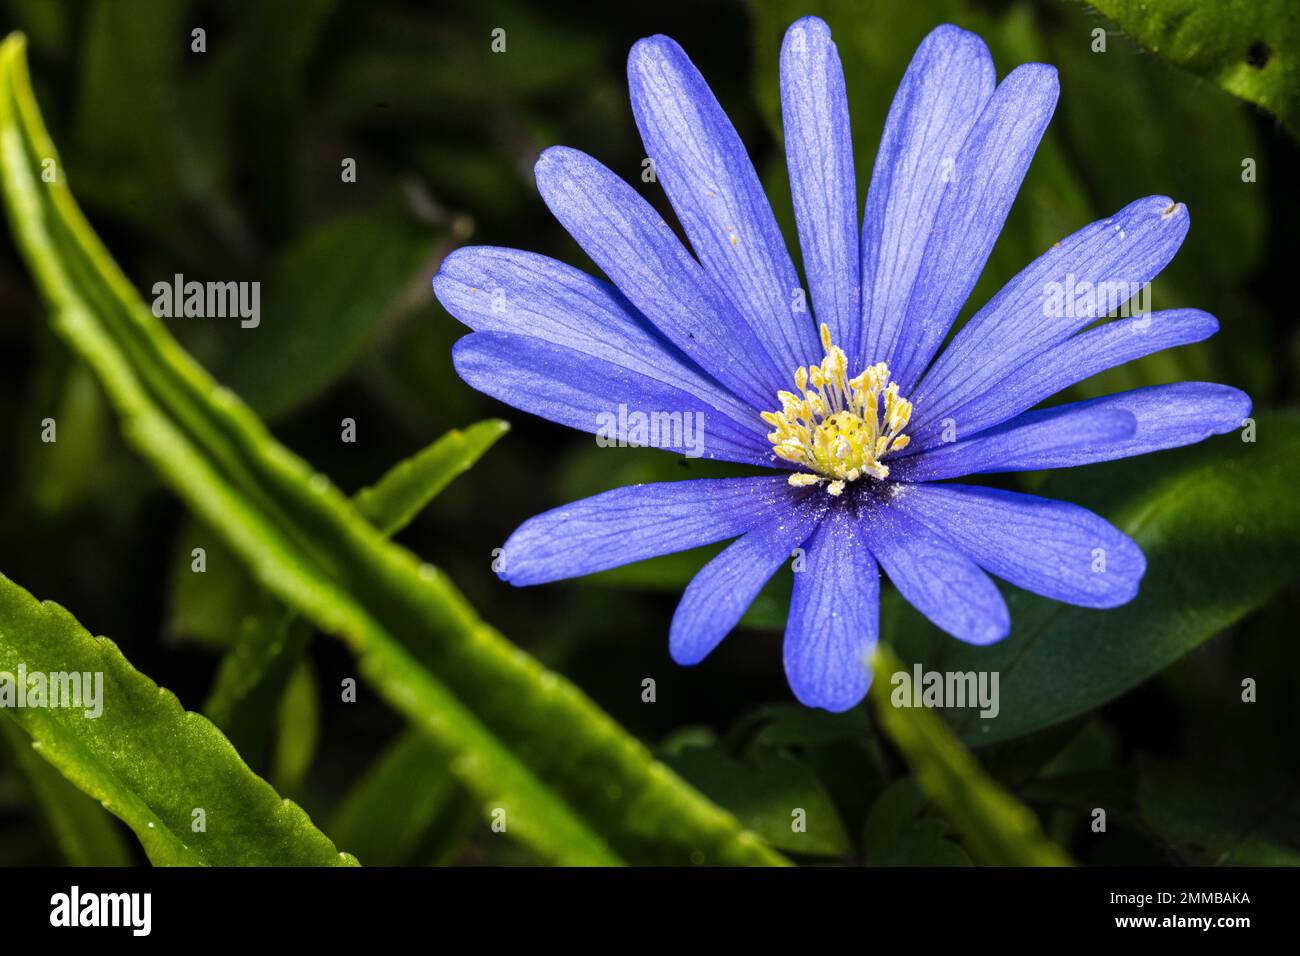 Macro photo of a beautiful flower of a blue anemone against blurred green leaves background Stock Photo